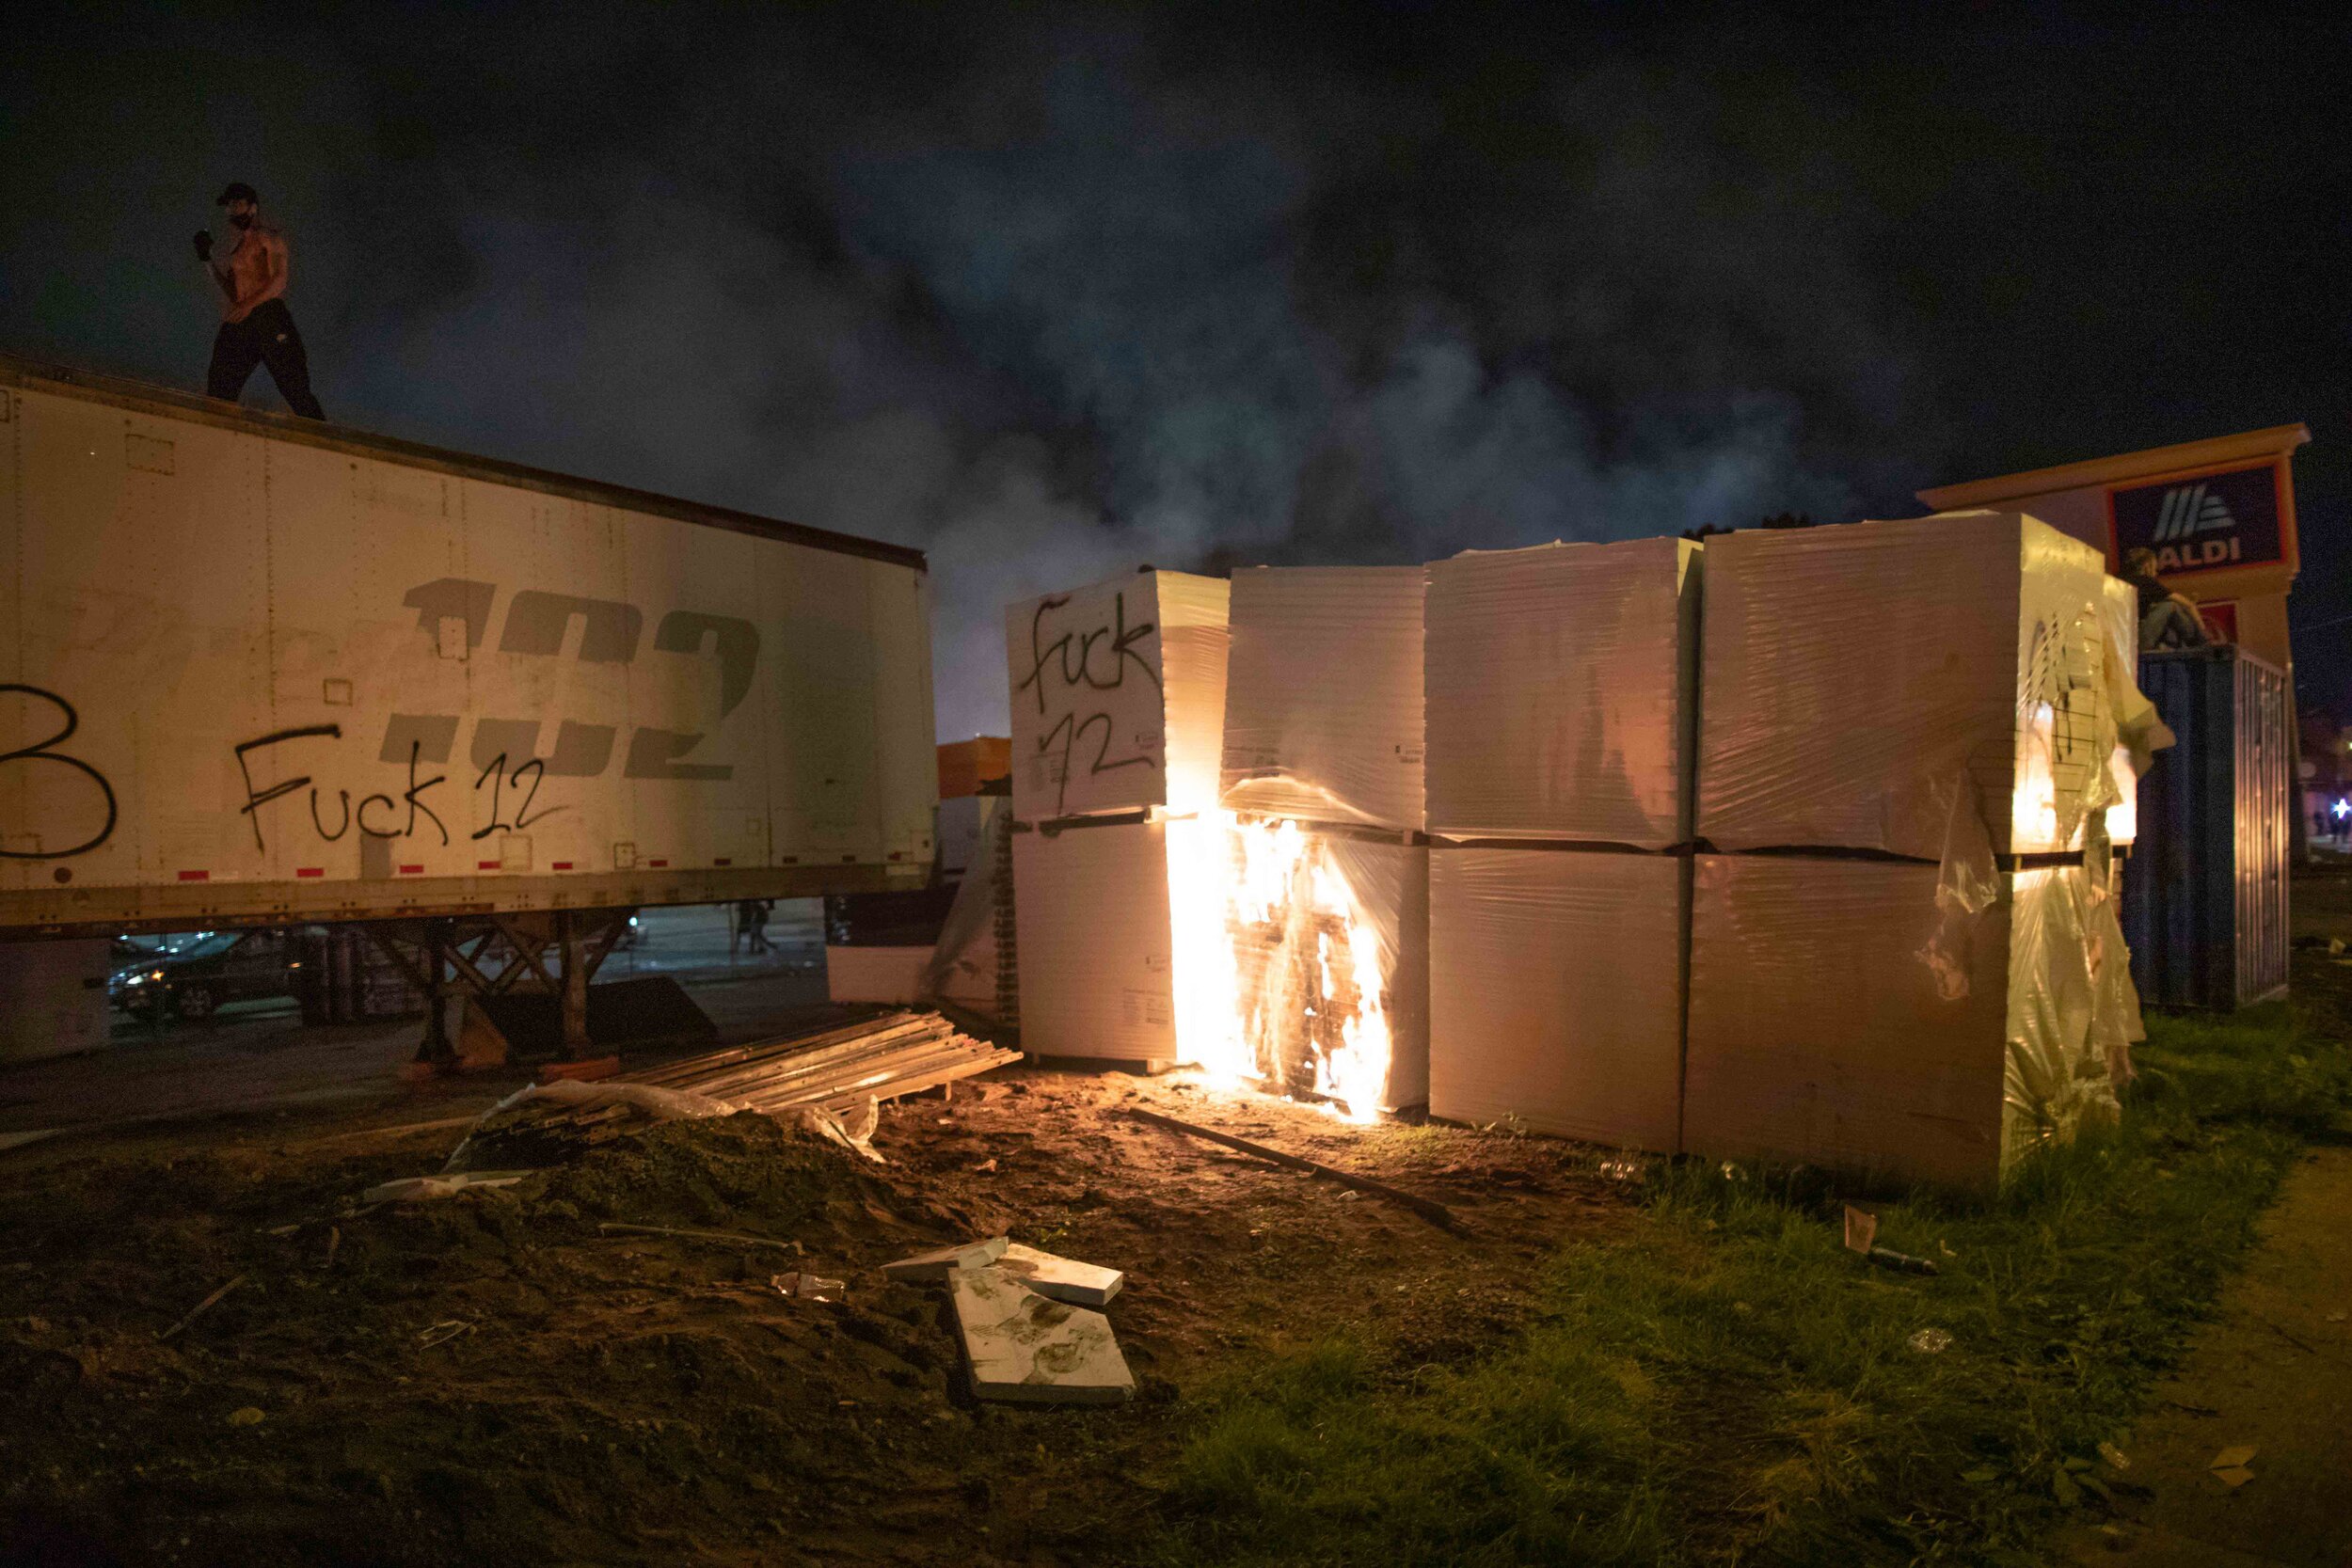  A man walks on top of a semi trailer after a crate of what appeared to be wood was set on fire during a riot in Minneapolis, Minnesota over the police killing of George Floyd on May 27. 